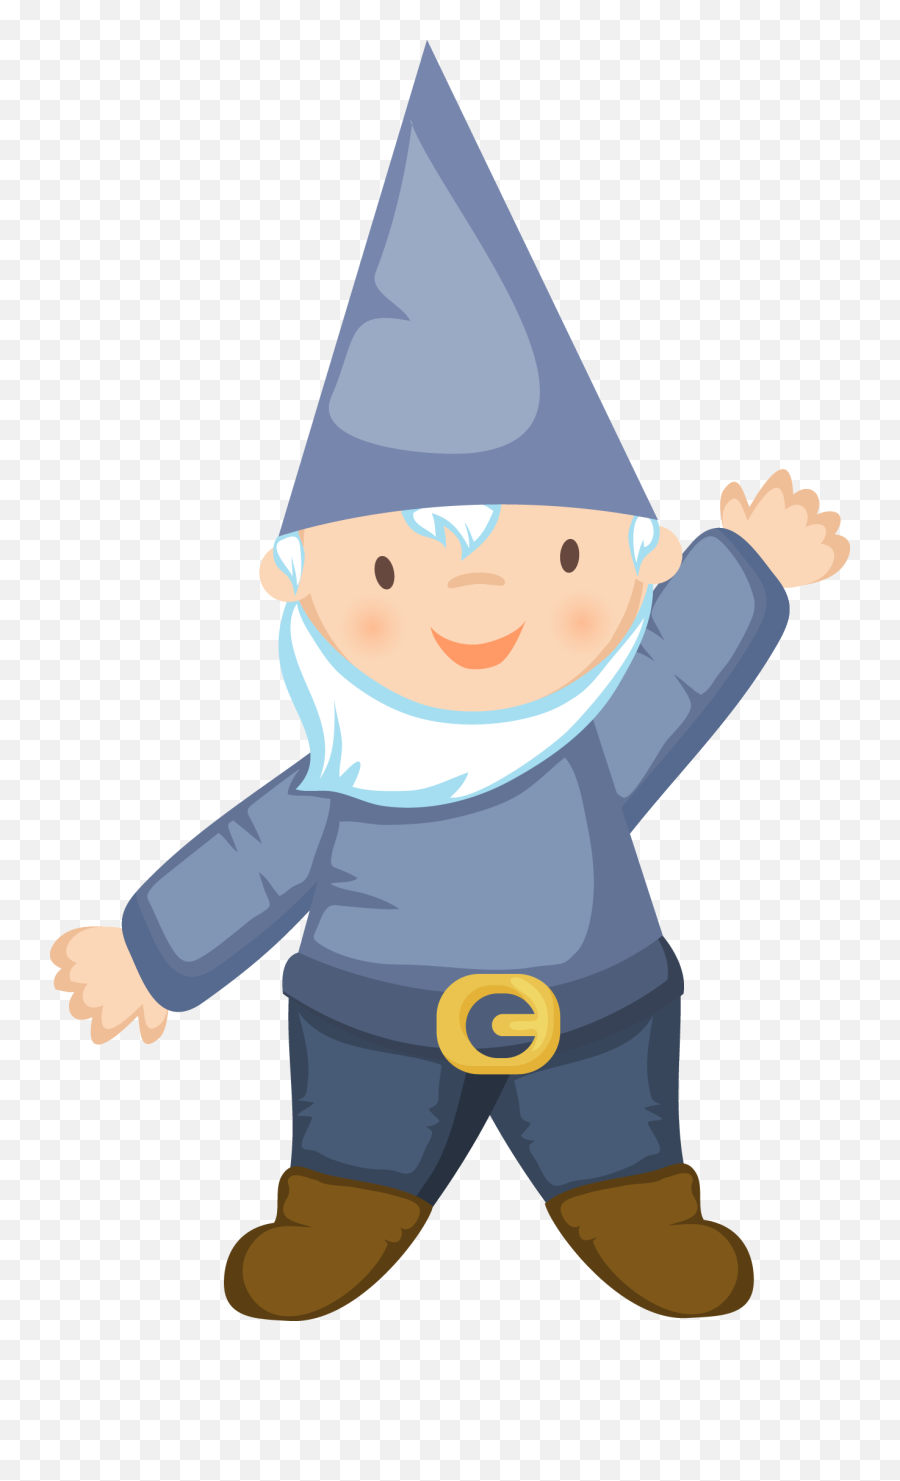 Transparent Png Images Icons And Clip Arts - Gnome Clipart Png,Gnome Transparent